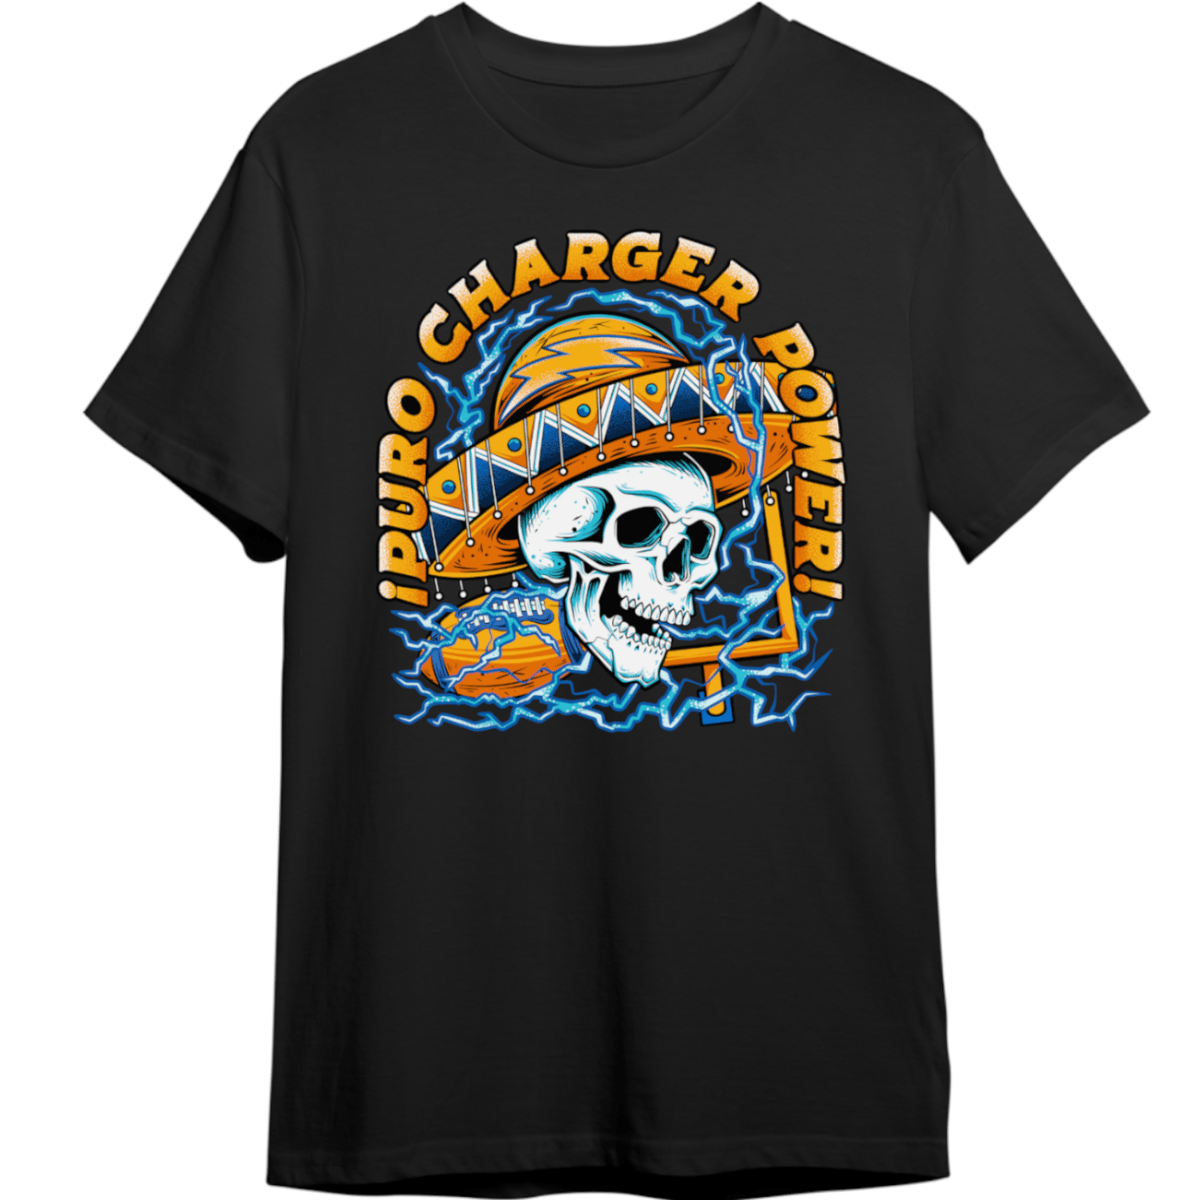 LA Chargers Puro Charger Power Mexican Skull T-Shirt